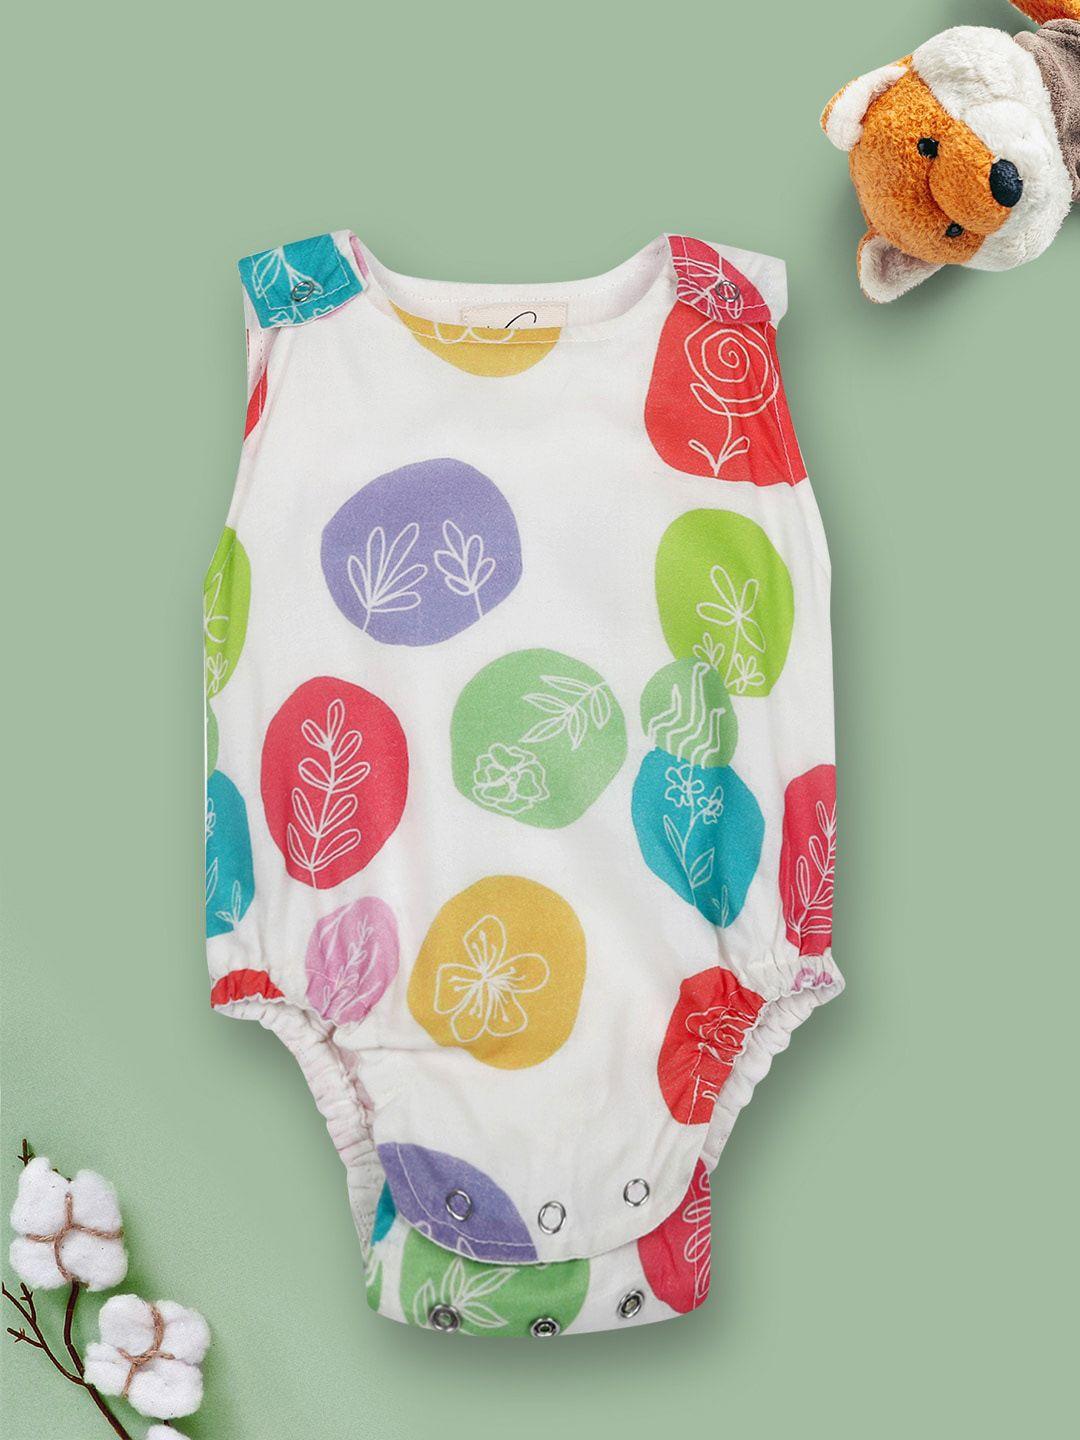 vastrarth-infants-white-&-red-printed-rompers